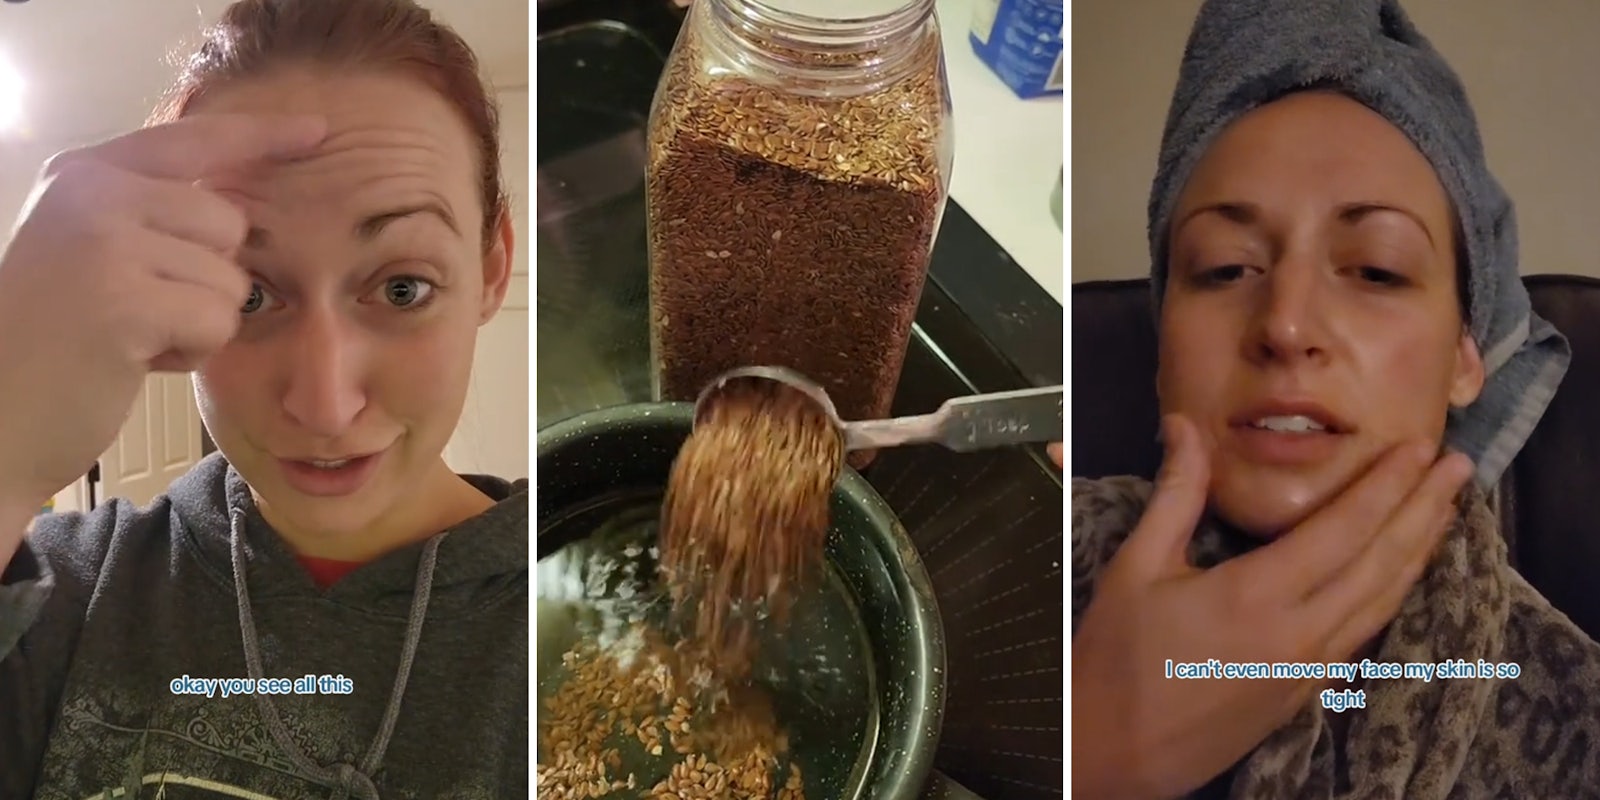 Woman uses flaxseed and boiling water for ‘DIY Botox.’